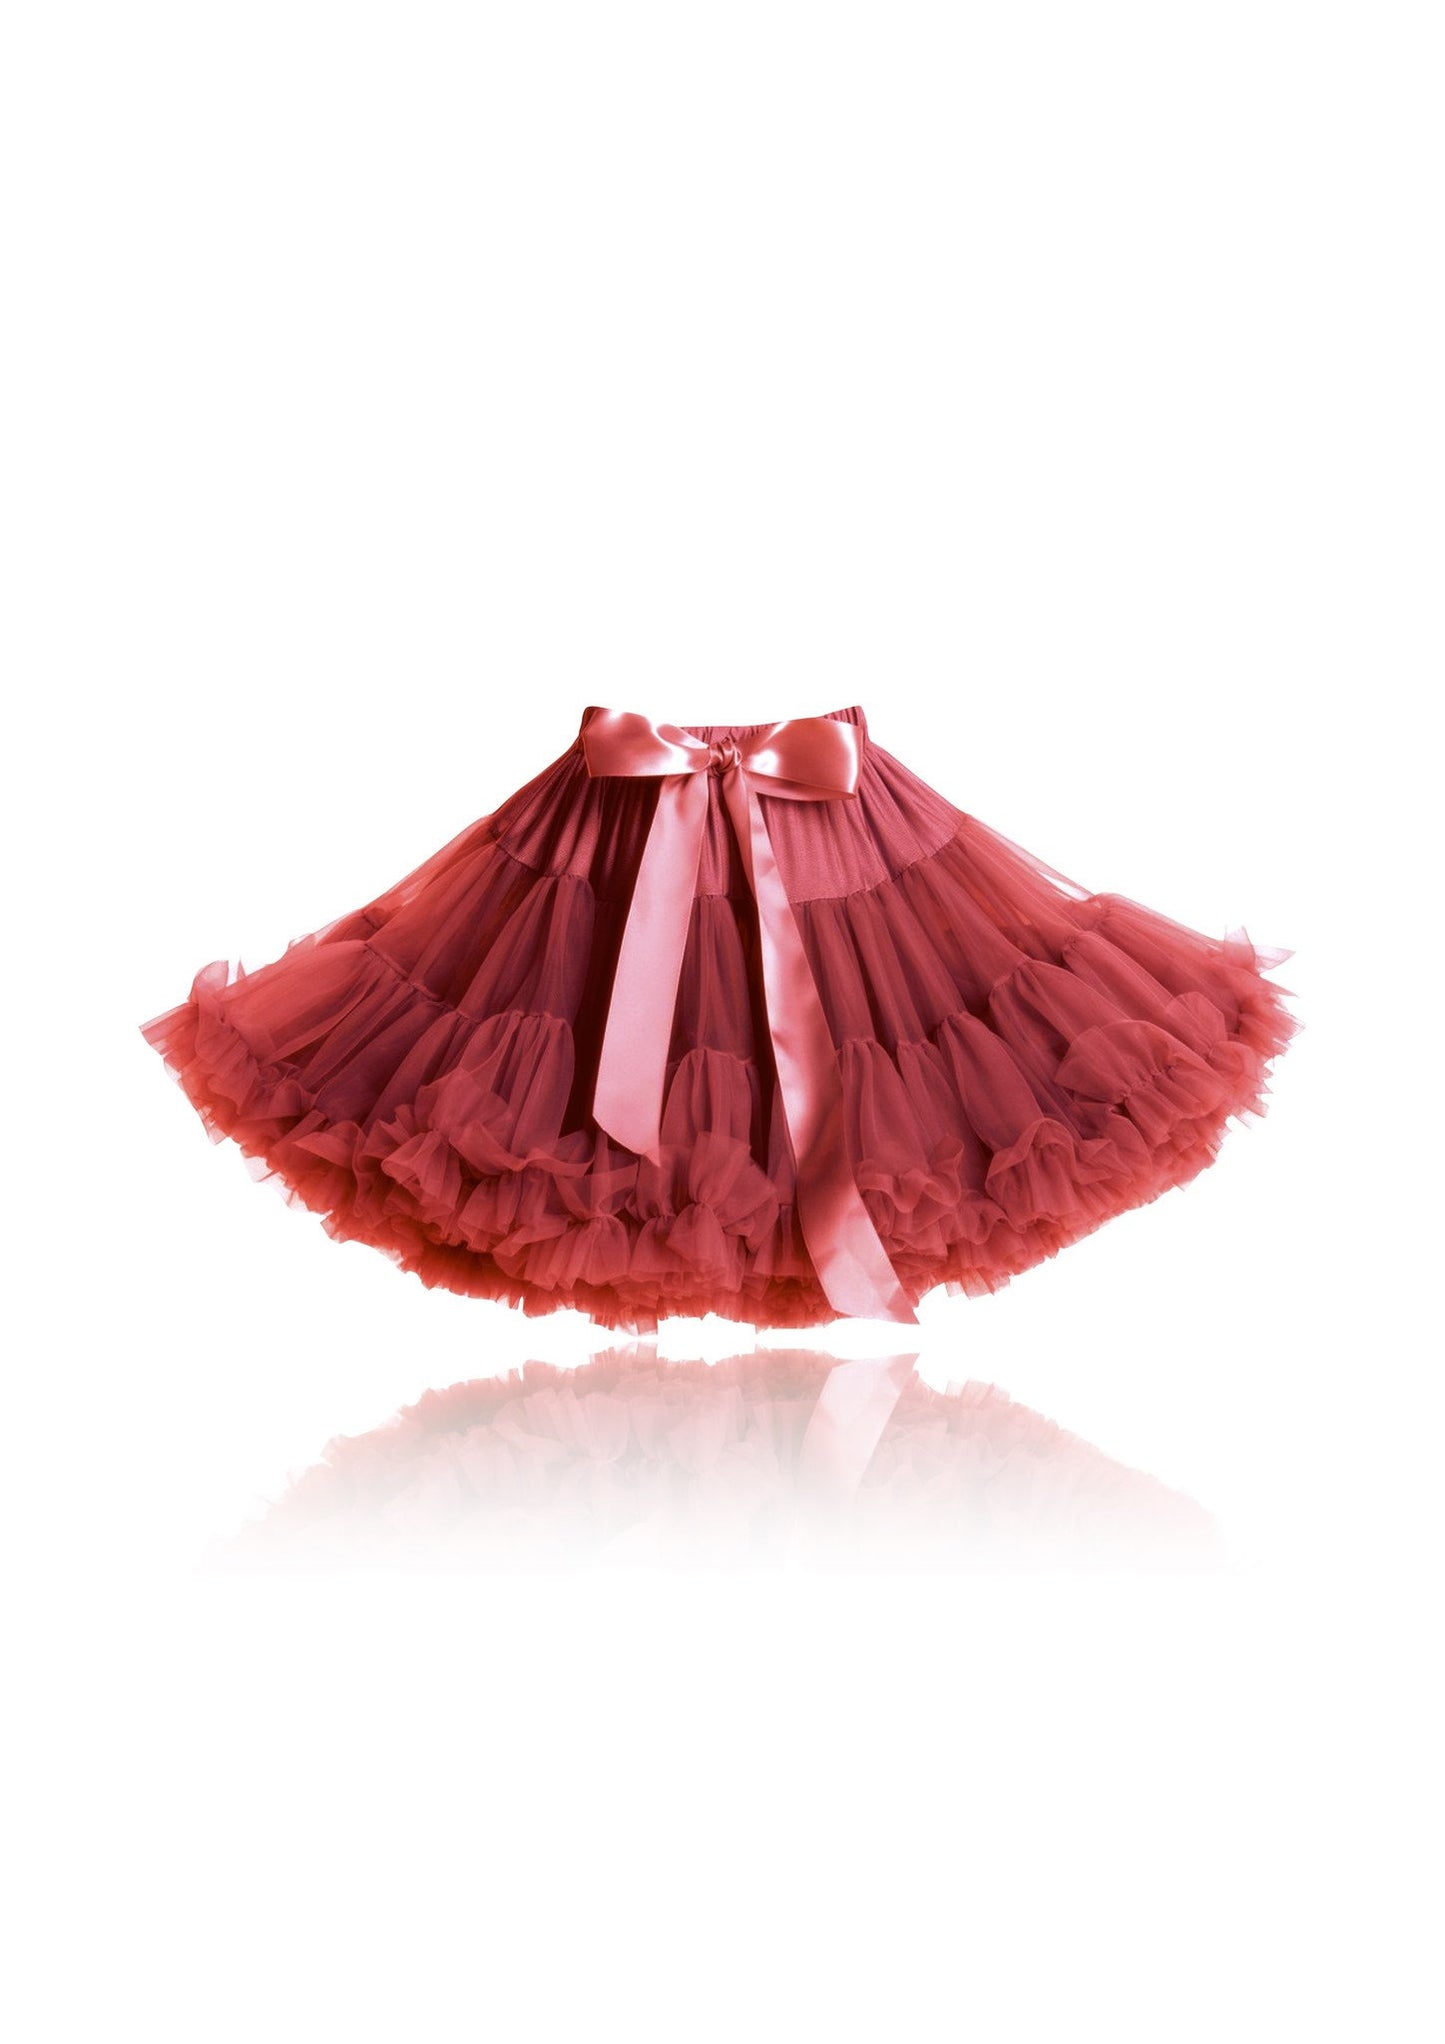 DOLLY by Le Petit Tom ® LITTLE RED RIDING HOOD pettiskirt red - DOLLY by Le Petit Tom ®